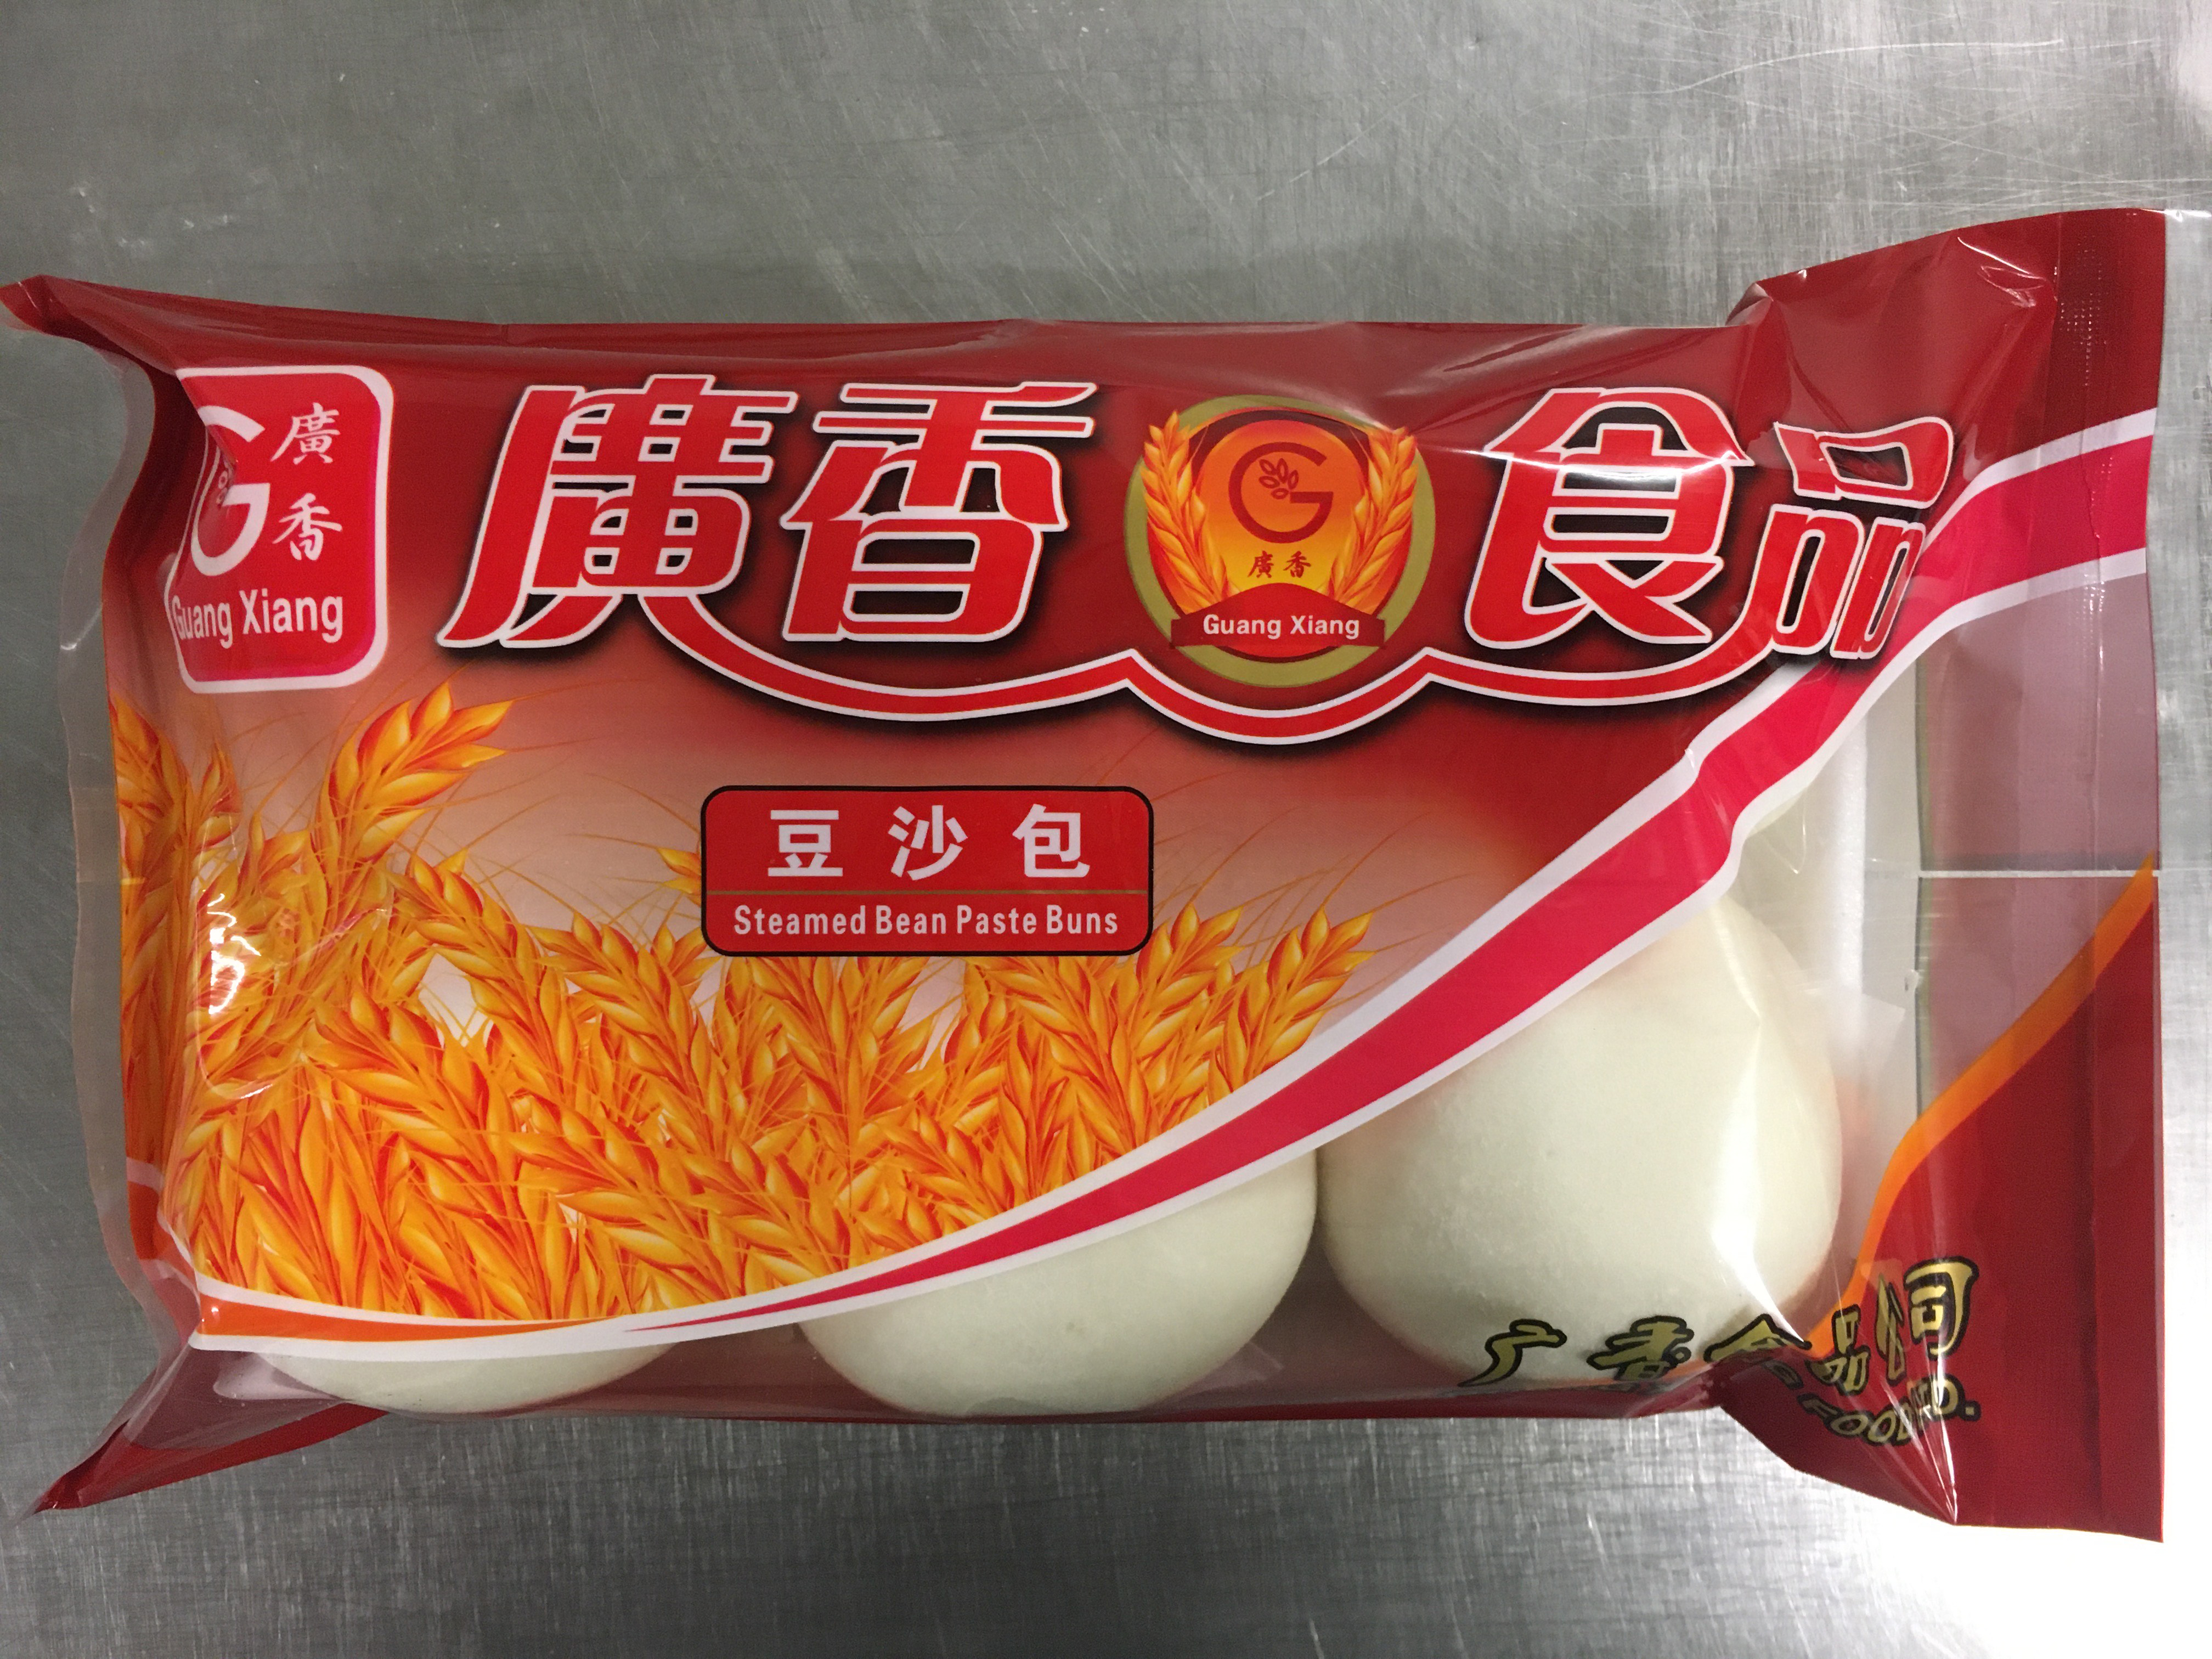 Image of Guangxiang brand Steamed Bean Paste Buns (522g) in a plasti pack